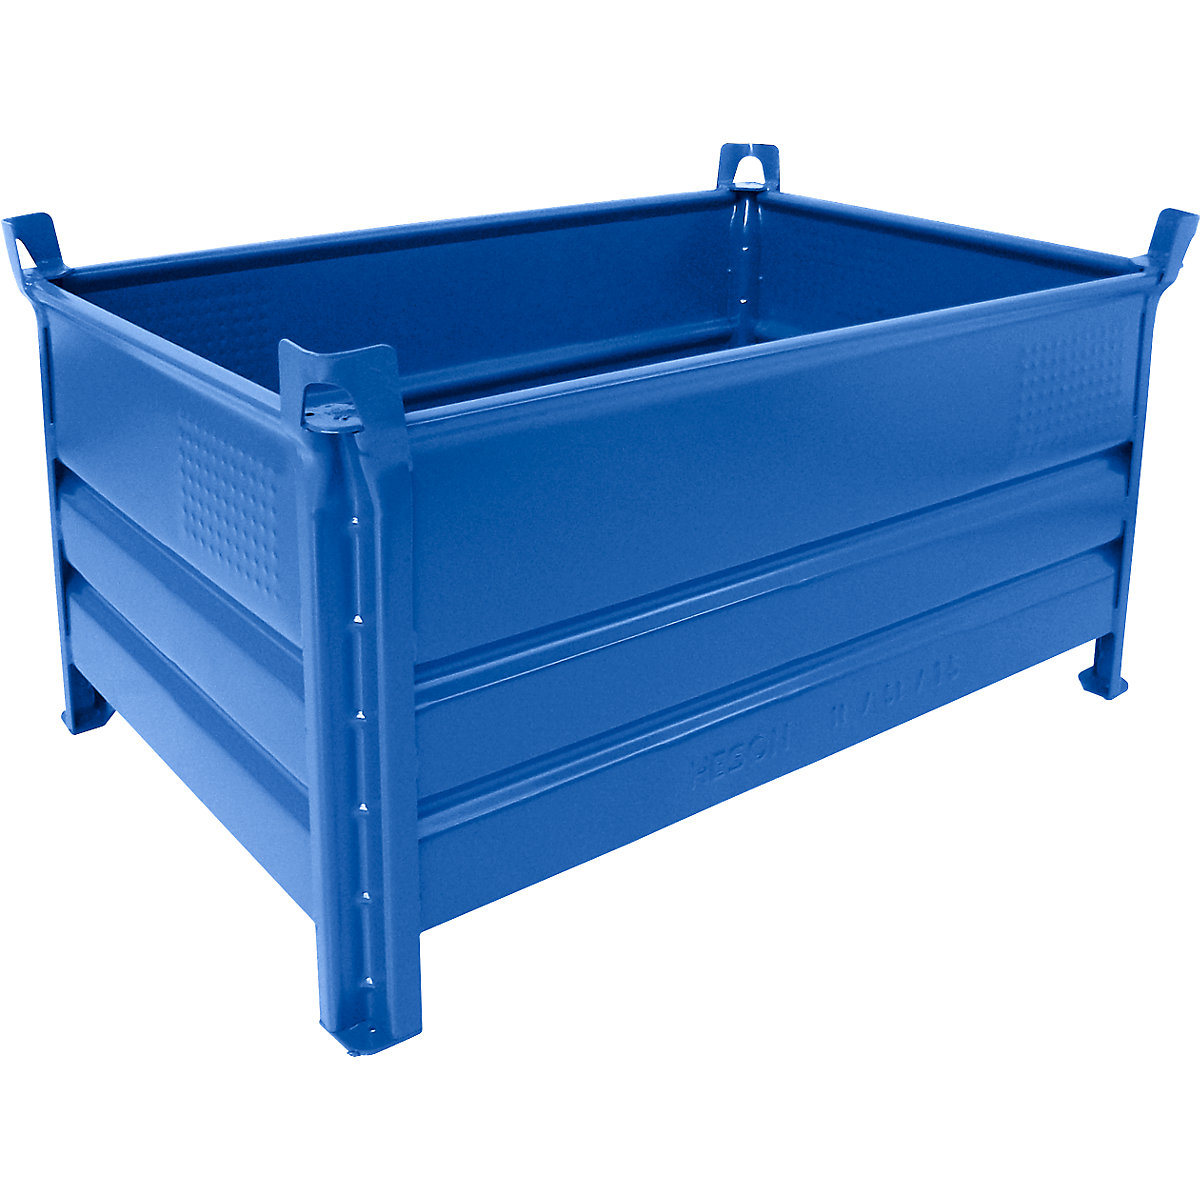 Solid panel box pallet – Heson, WxL 800 x 1200 mm, max. load 500 kg, blue, 5+ items-5